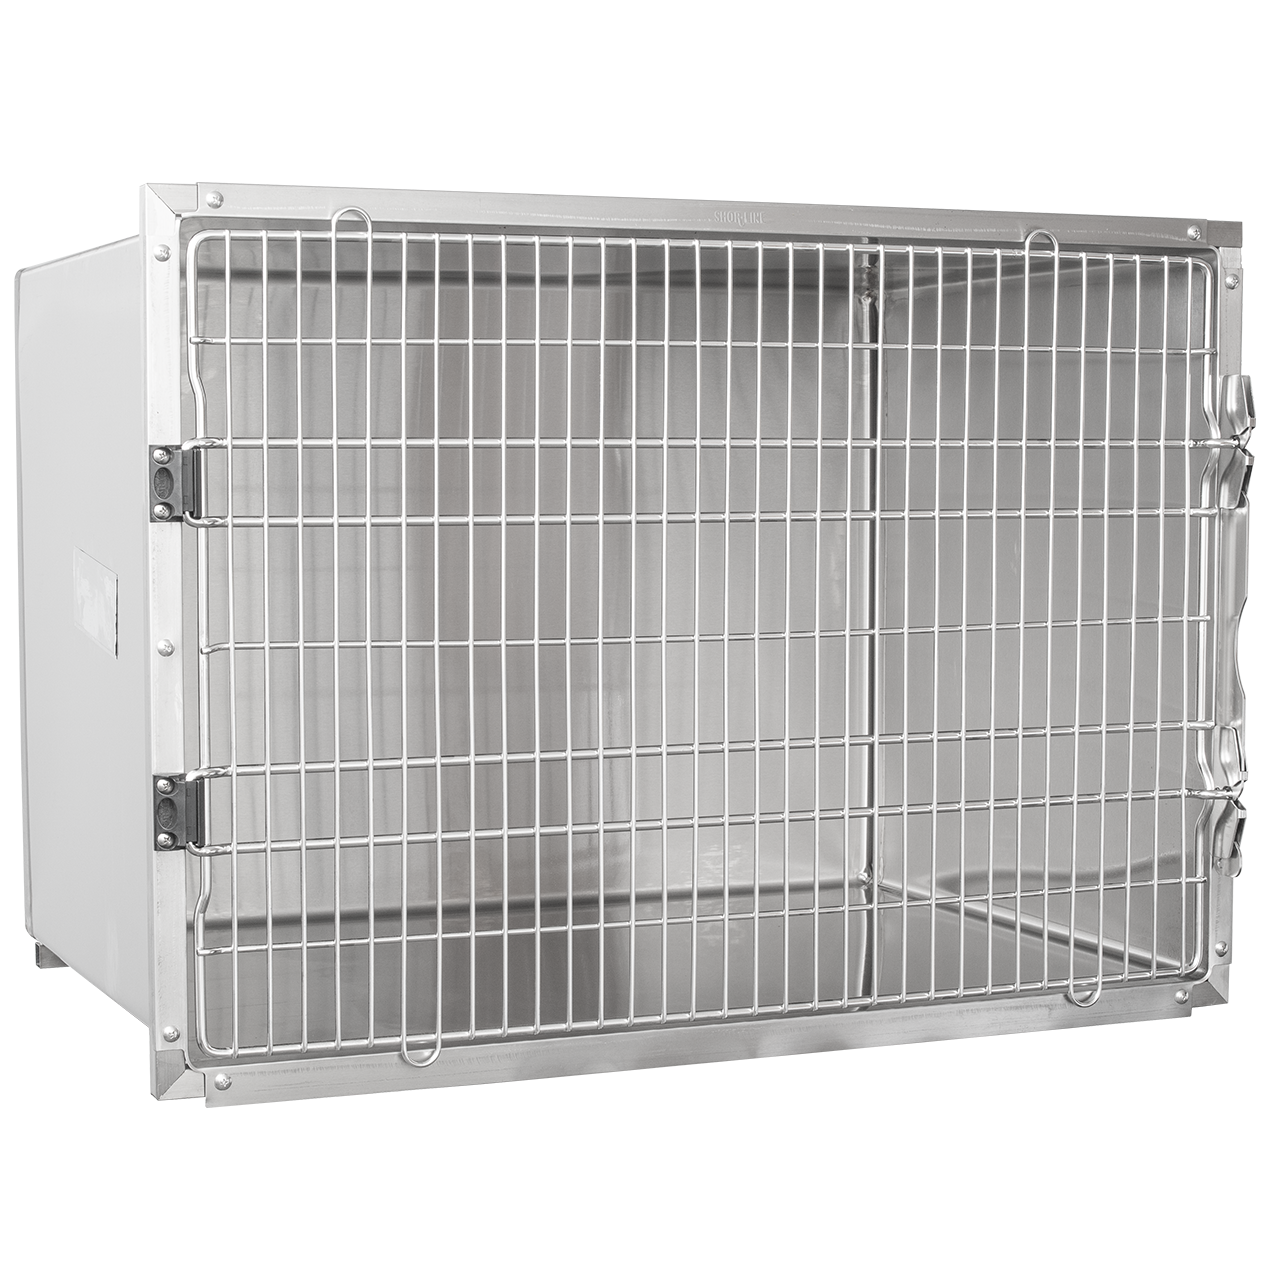 Shor-Line Stainless Steel Single Cage, 42"W X 30"H-Grooming Cage Bank-Pet's Choice Supply